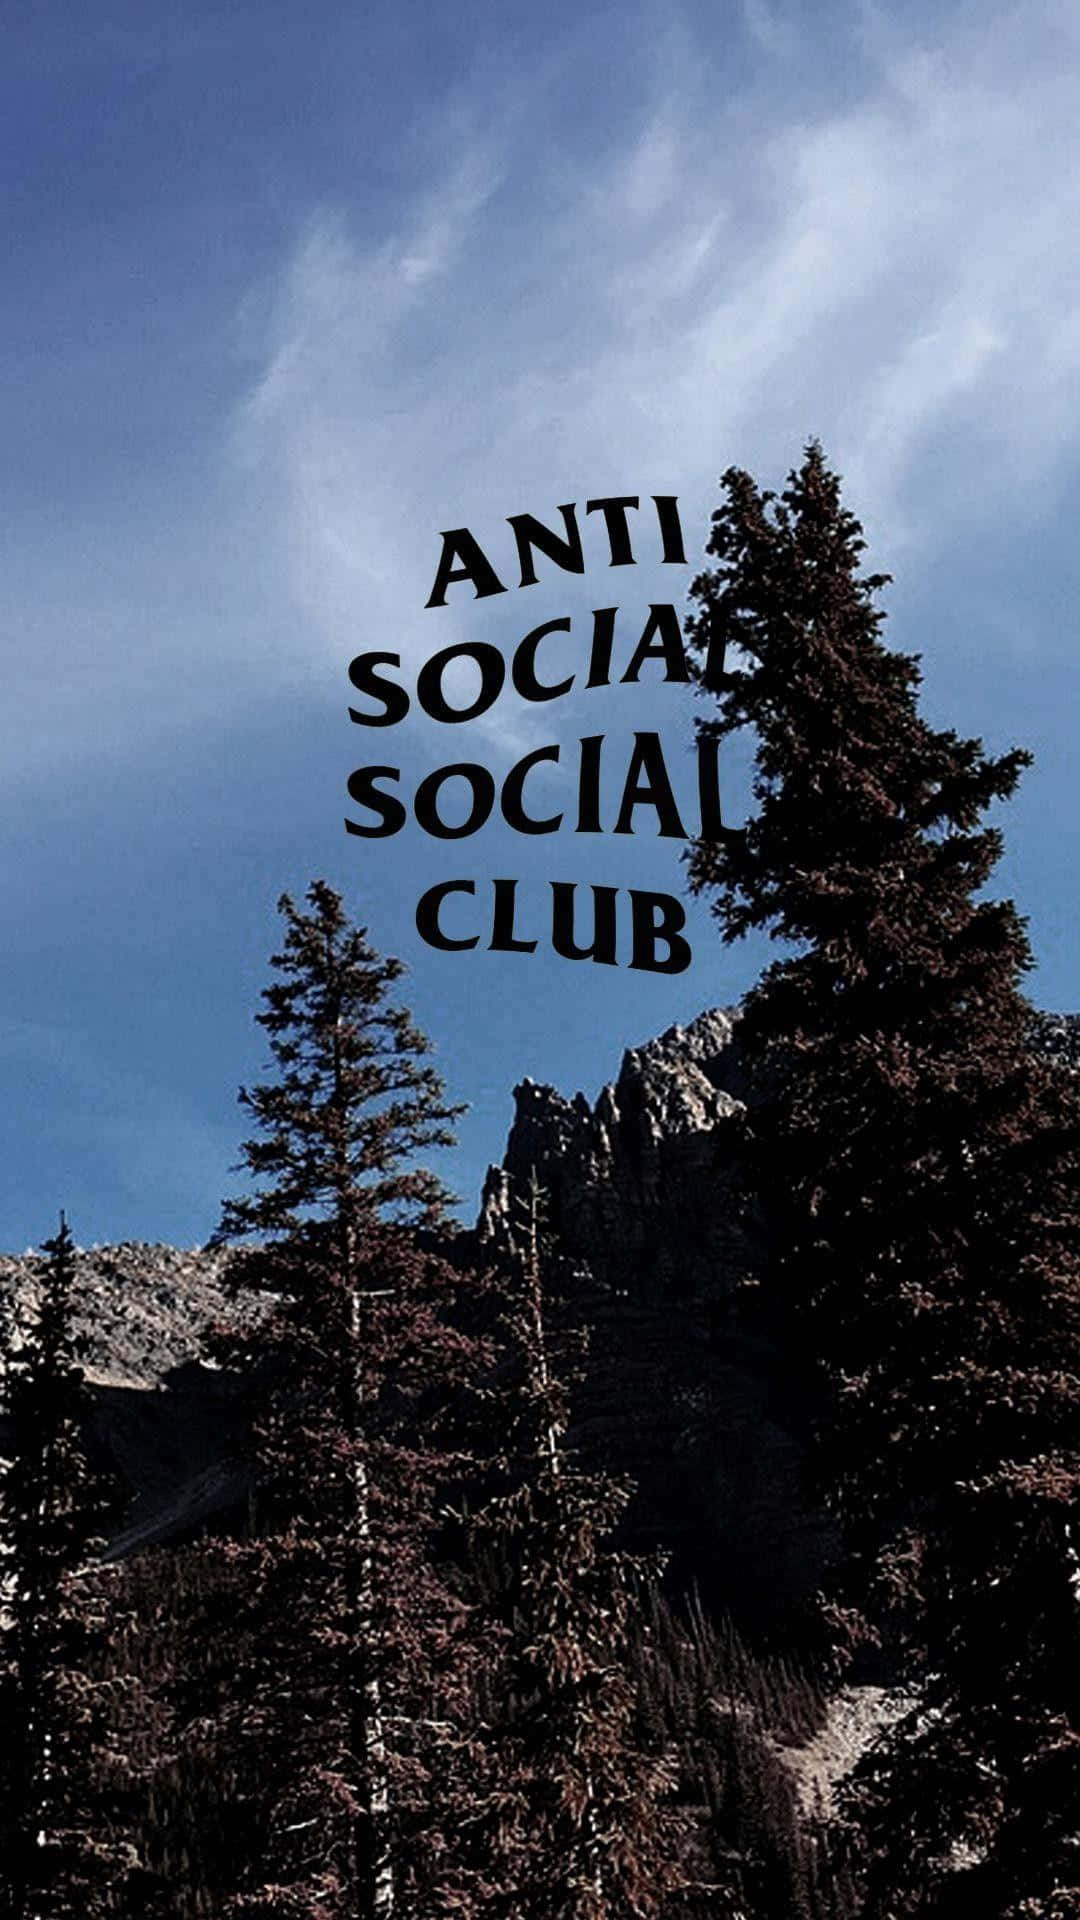 Forest And Logo Of Anti Social Club Iphone Wallpaper